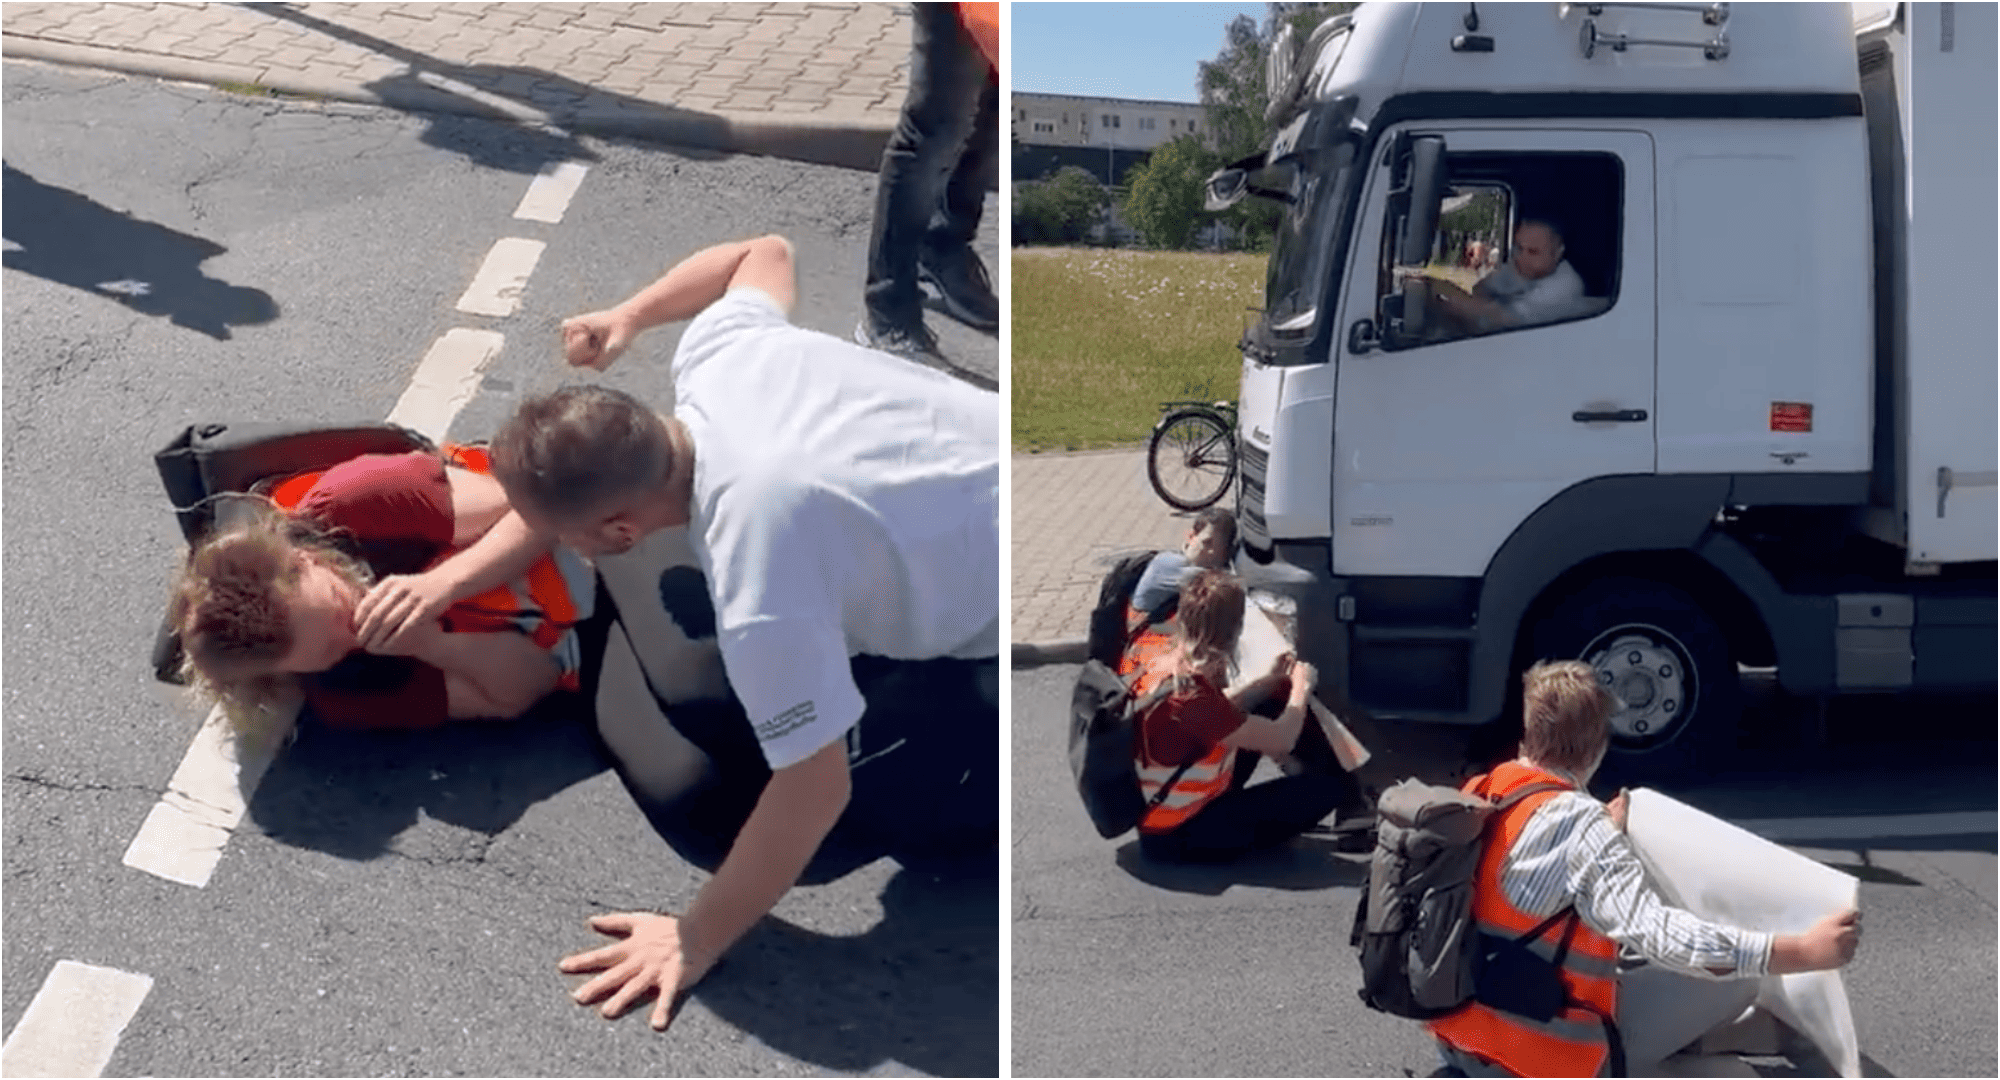 More road rage befalls Just Stop Oil protesters